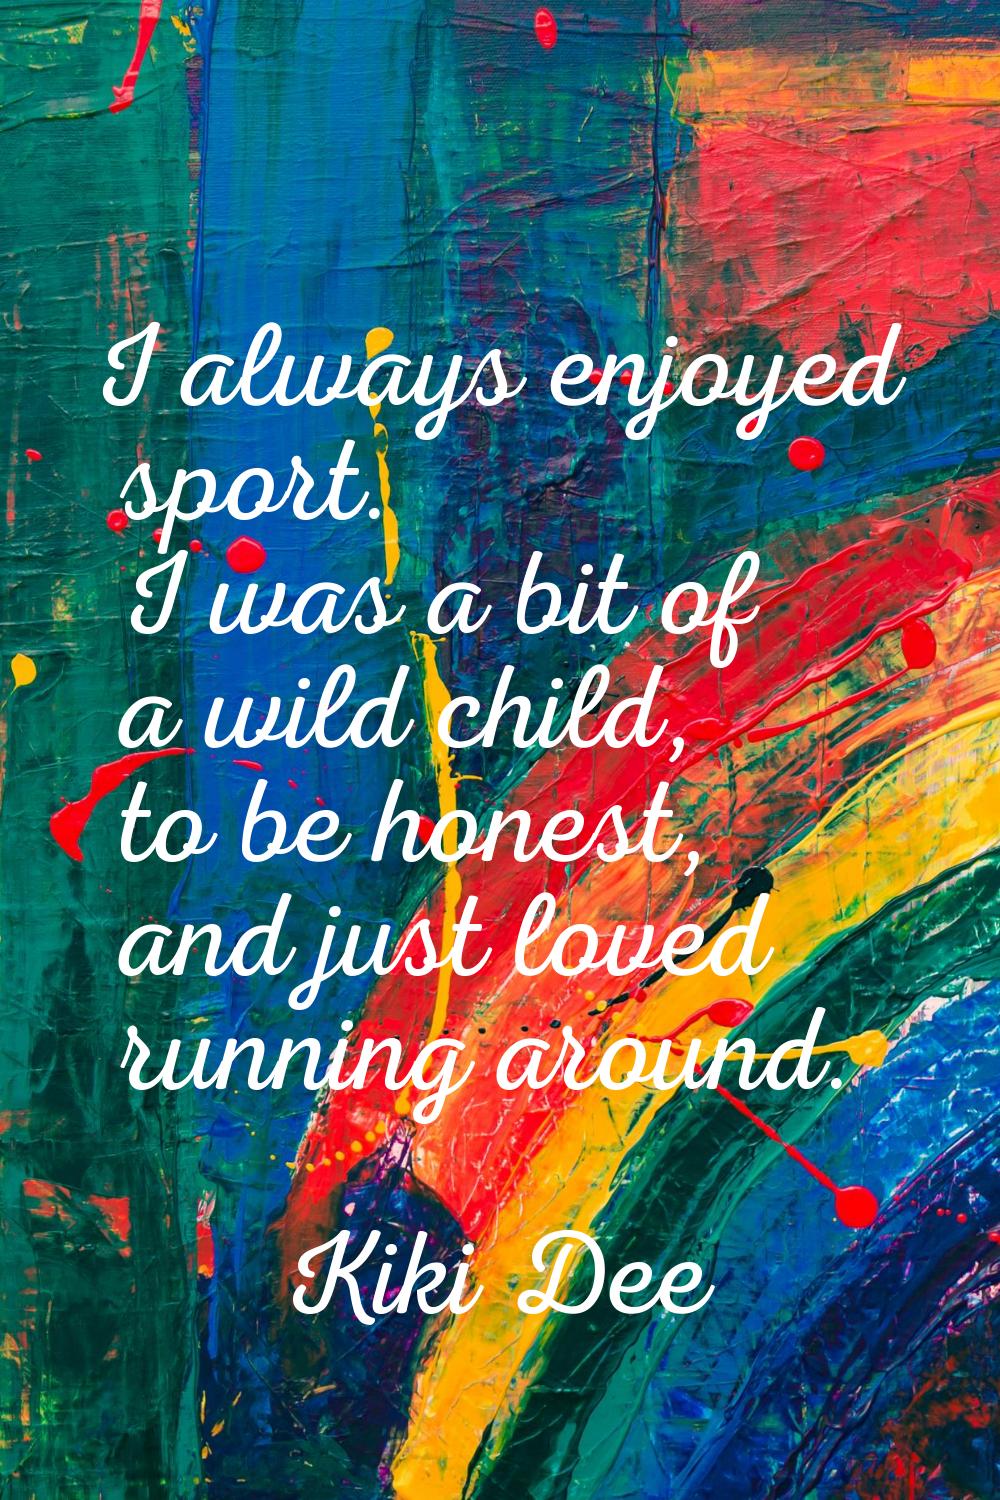 I always enjoyed sport. I was a bit of a wild child, to be honest, and just loved running around.